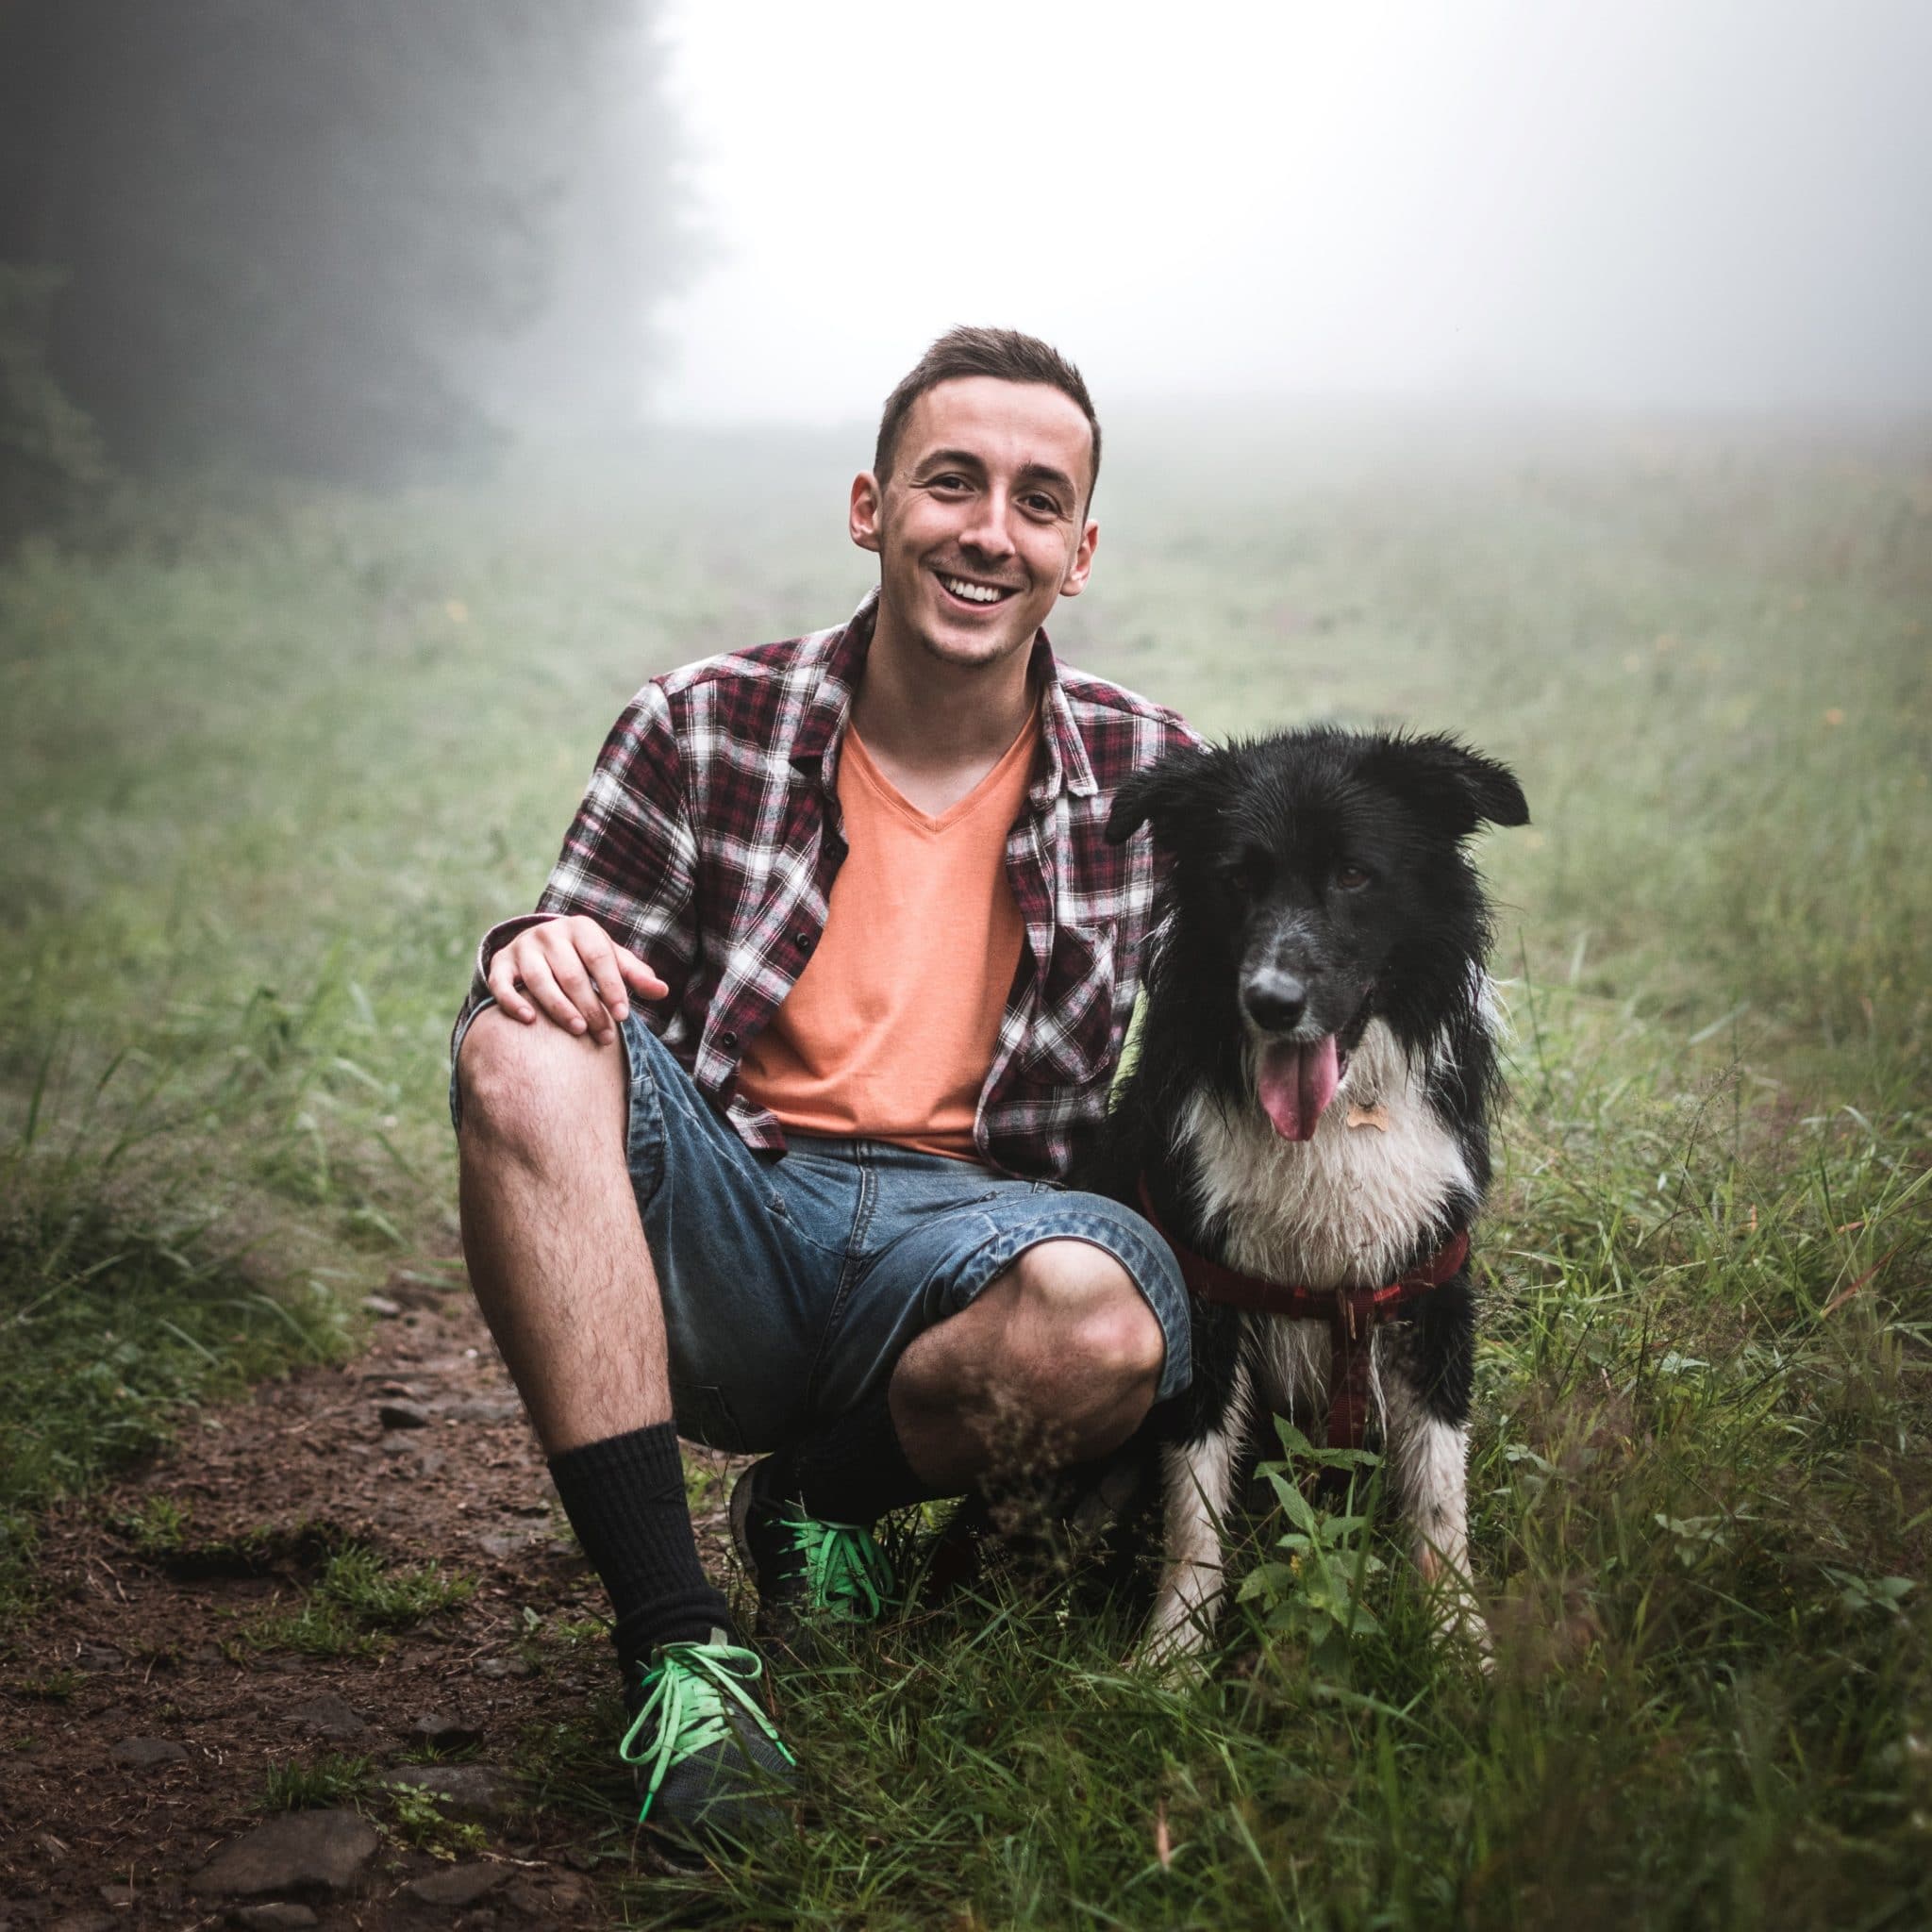 Casually dressed man standing on foggy trail with black and white dog by his side. Man is smiling, implying he and his dog are going for a walk.